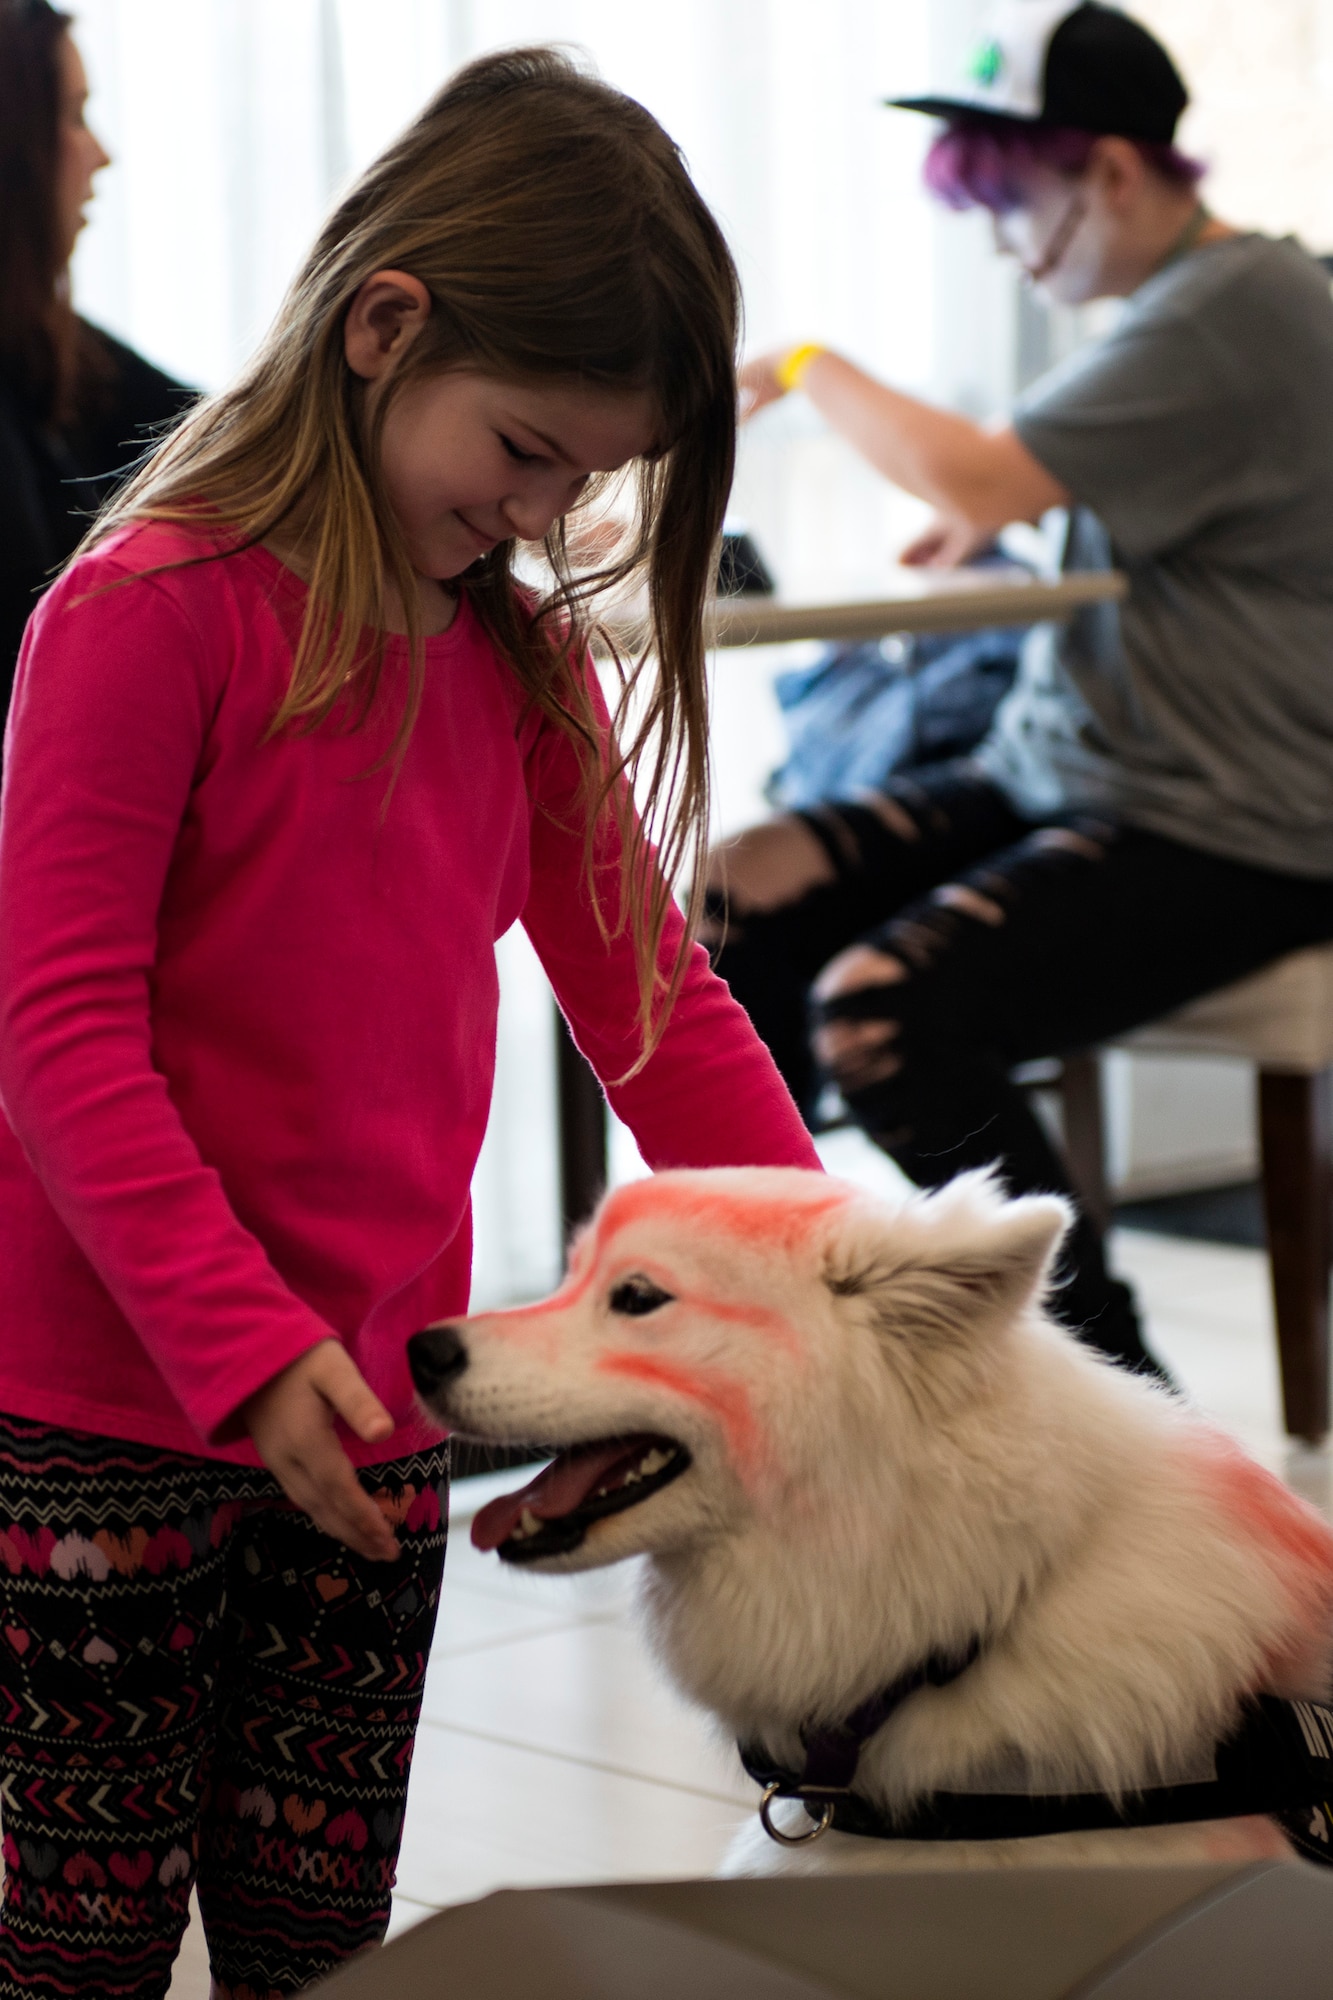 Kate pets a dog cosplayer while at Tiger Con, April 14, 2018, in Valdosta, Ga. Tiger Con was a convention, open to Moody residents and the local community, geared toward giving pop culture enthusiasts a chance to dress and role play as their favorite movie, TV show or comic characters. The event included a costume contest, an anime themed café, pop-culture artist panels along with shopping vendors and a guest appearance of veteran voice actor Richard Epcar, who’s known for portraying Raiden in the video series Mortal Kombat. (U.S. Air Force photo by Airman 1st Class Erick Requadt)